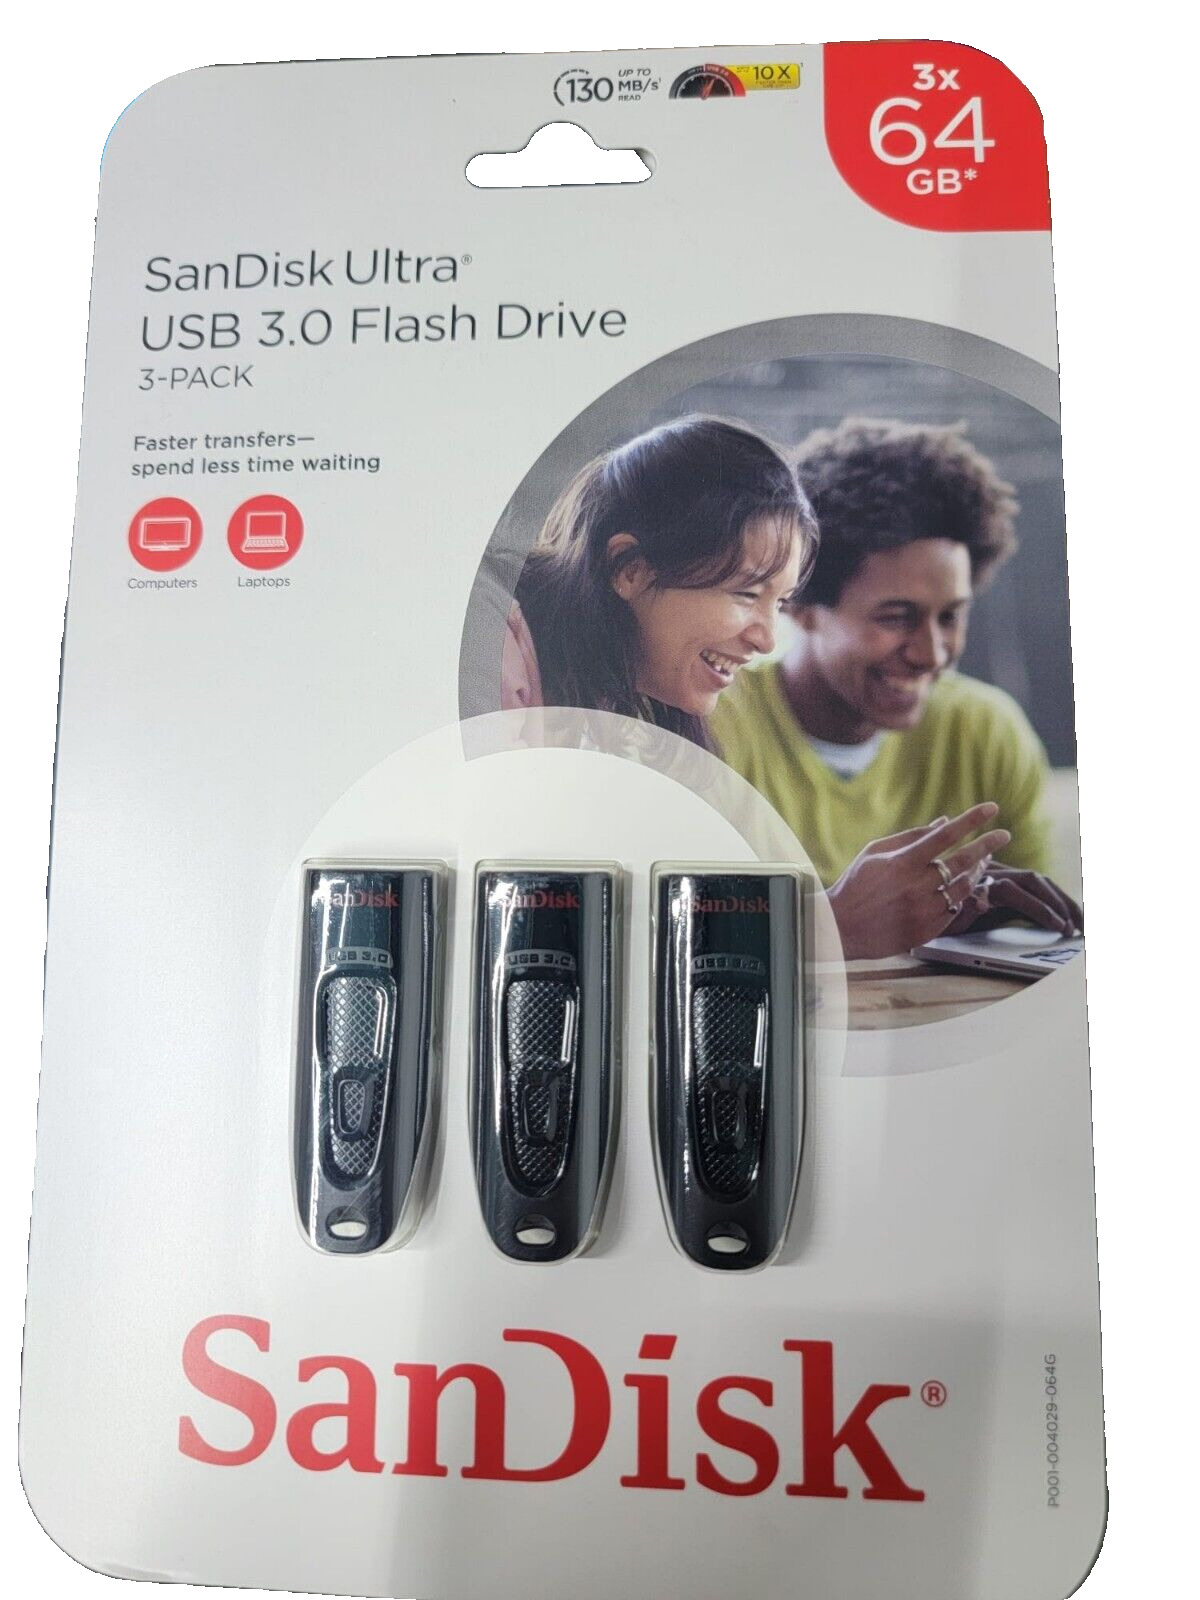 3 pack SanDisk 64gb USB 3.0 Flash Drive Total 192Gb New in Retail Package